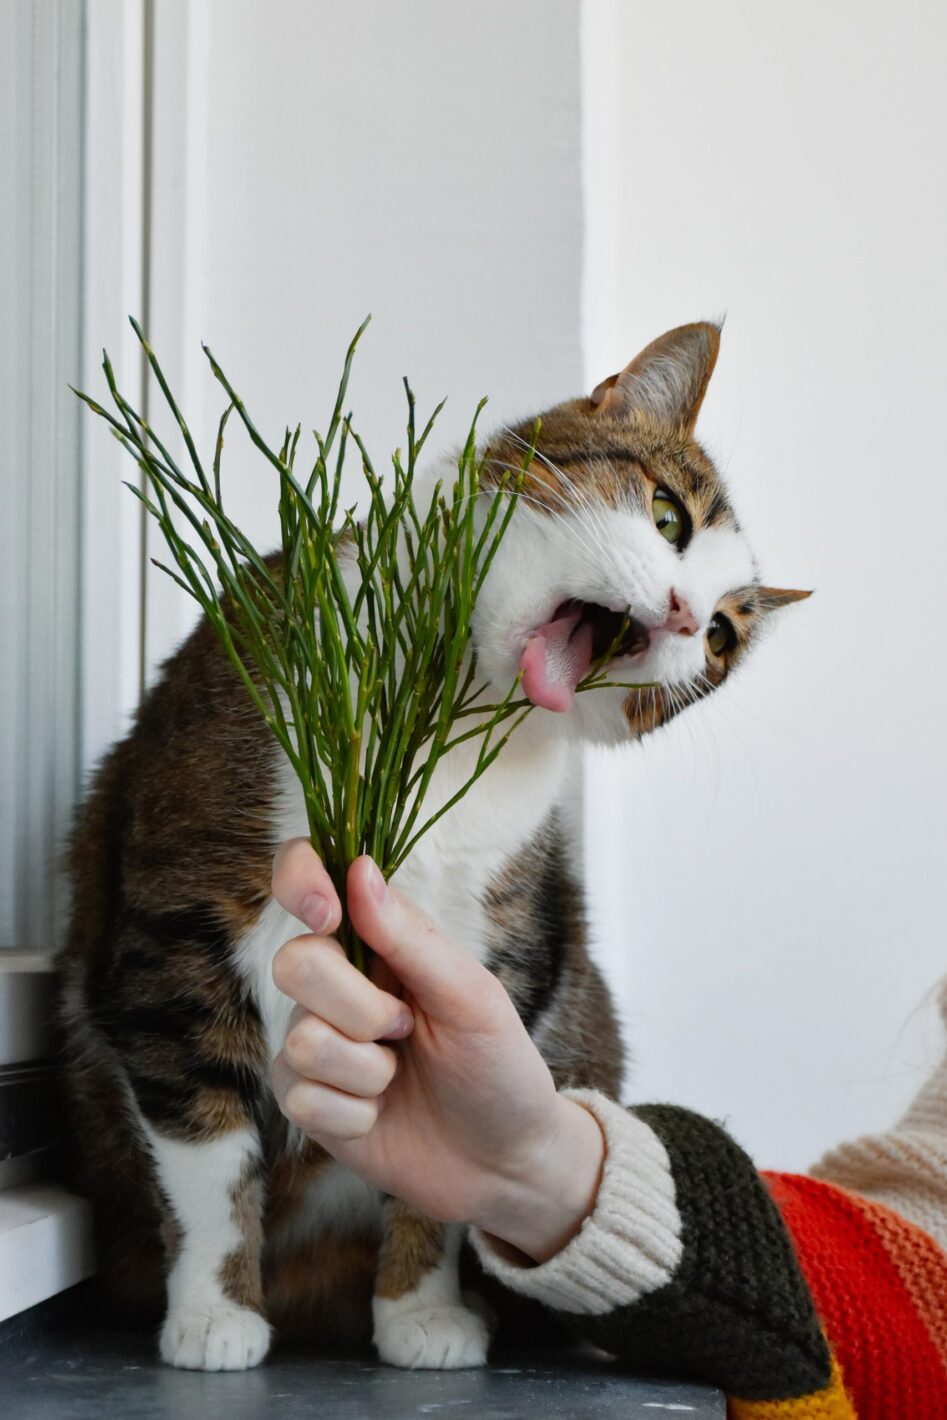 herbe a chat cataire